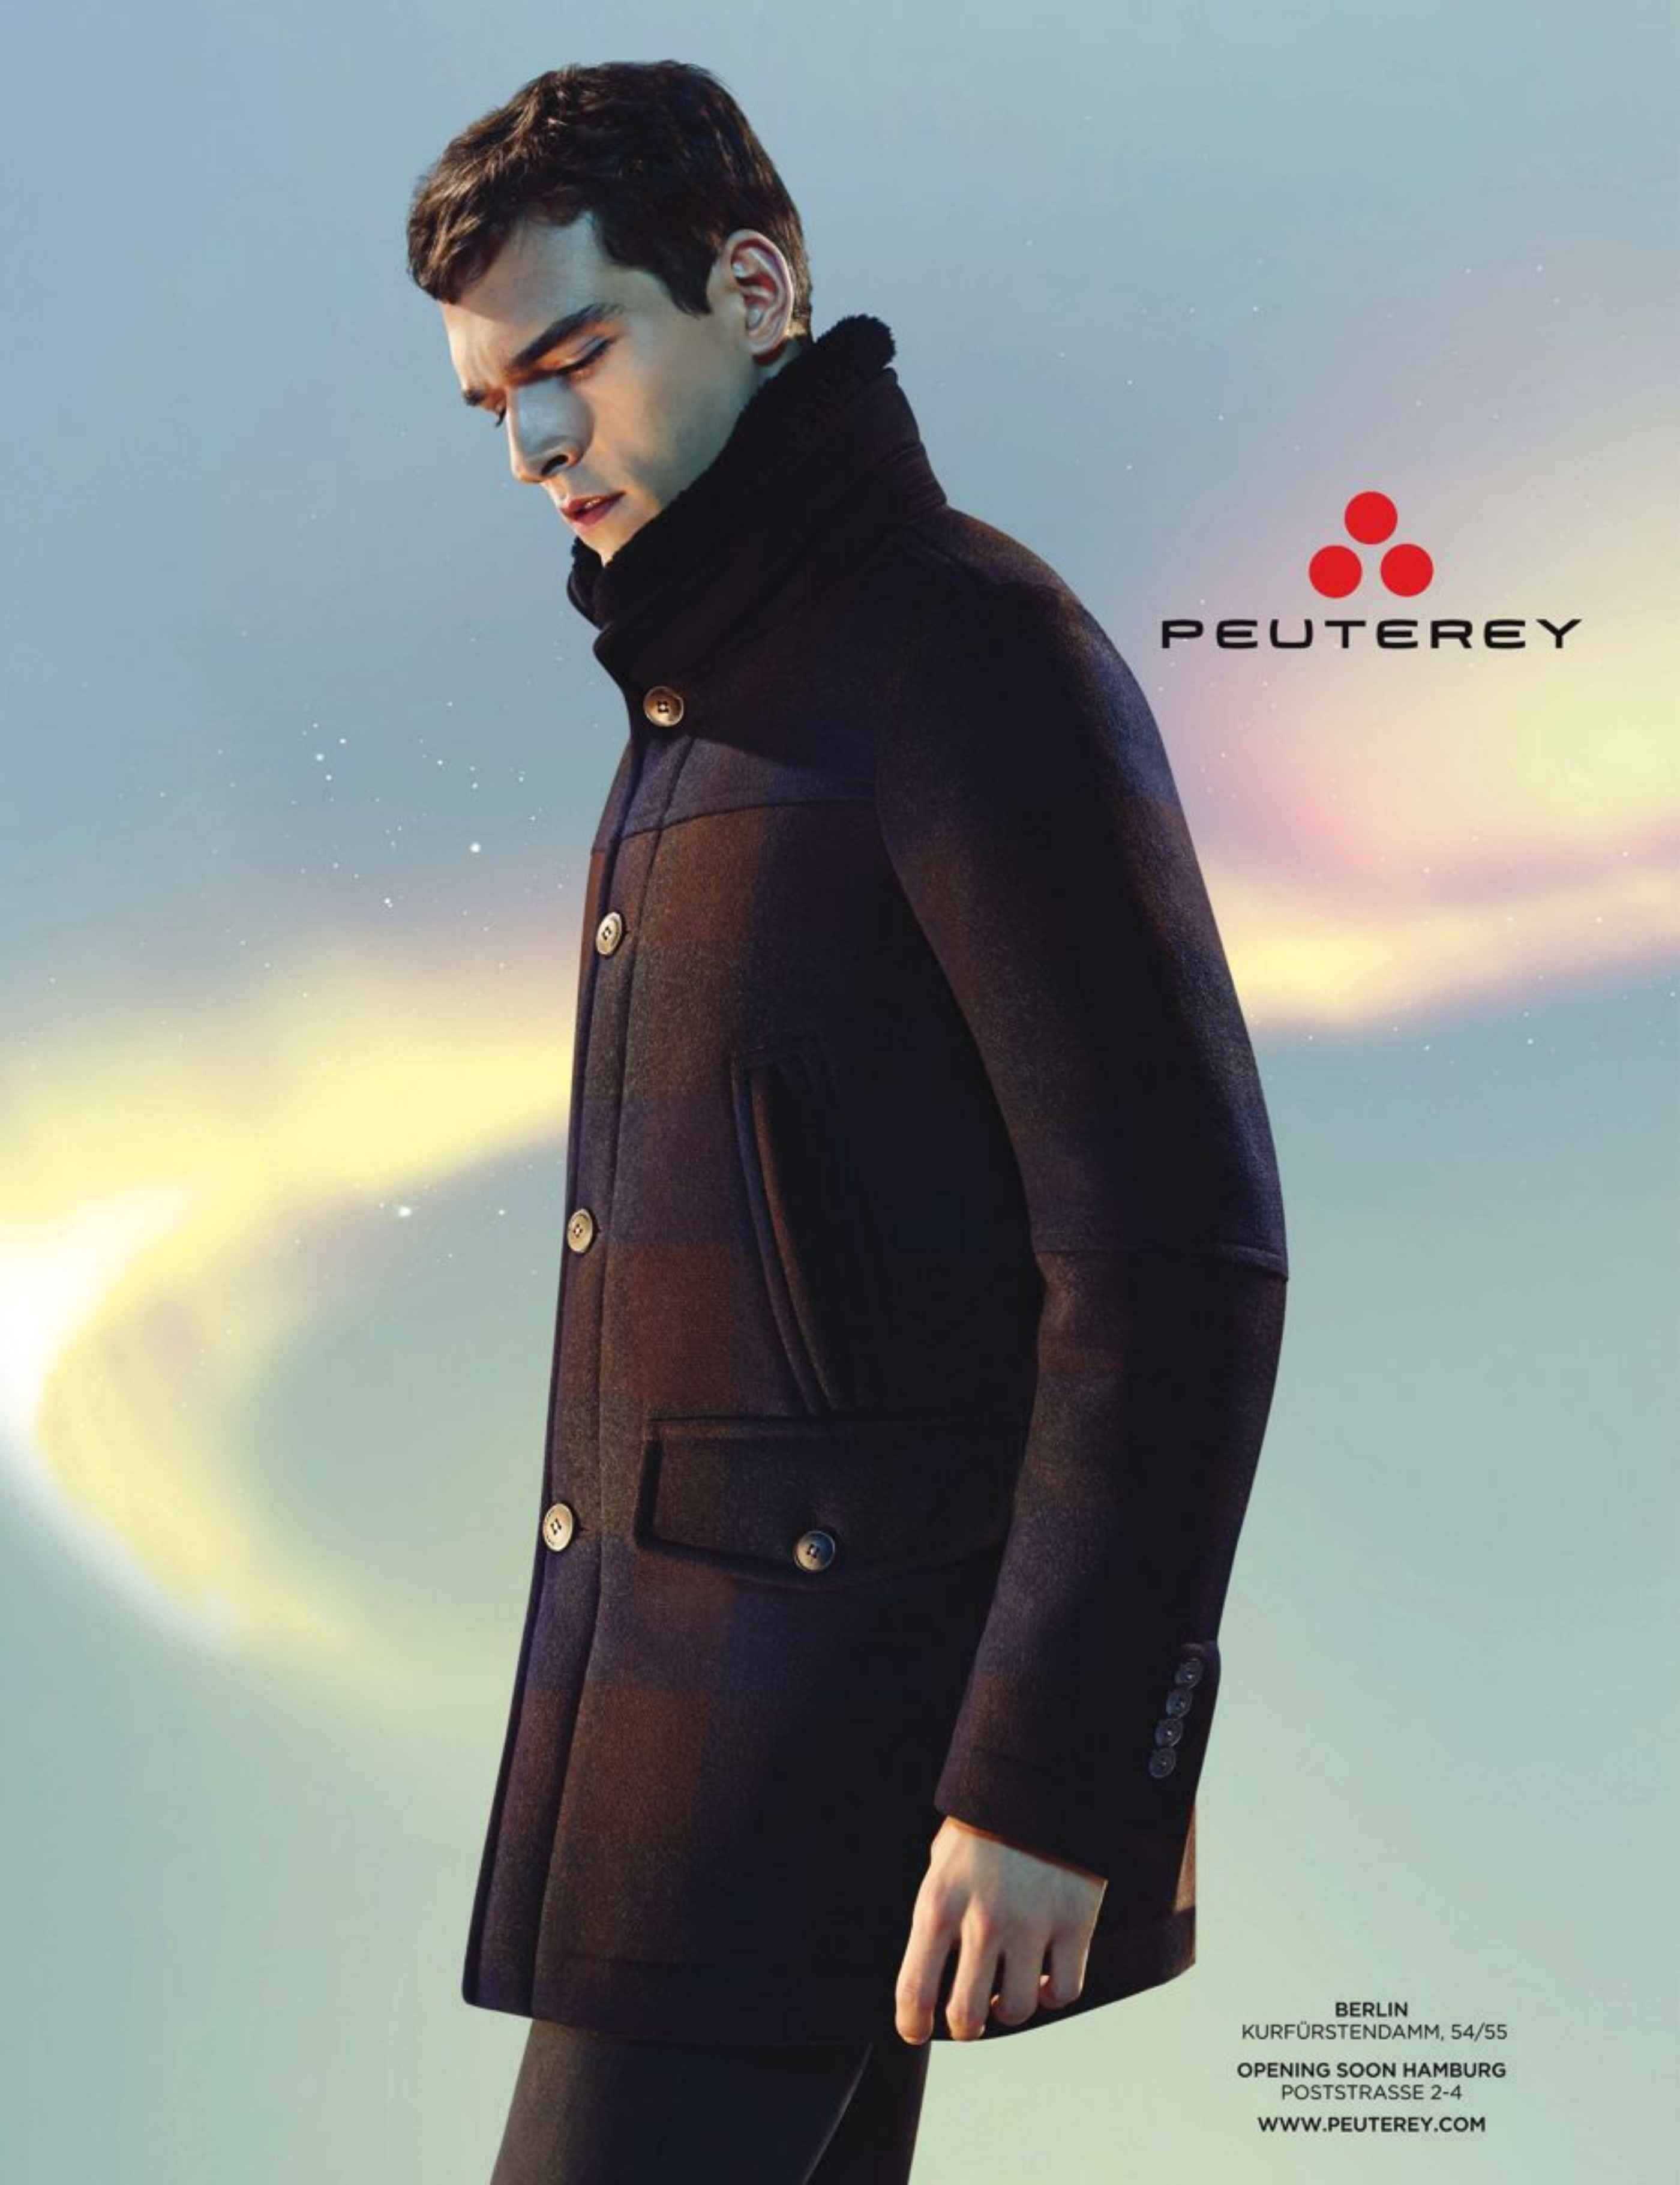 First Look: Alexandre Cunha Stars in Peuterey Fall/Winter 2014 Campaign